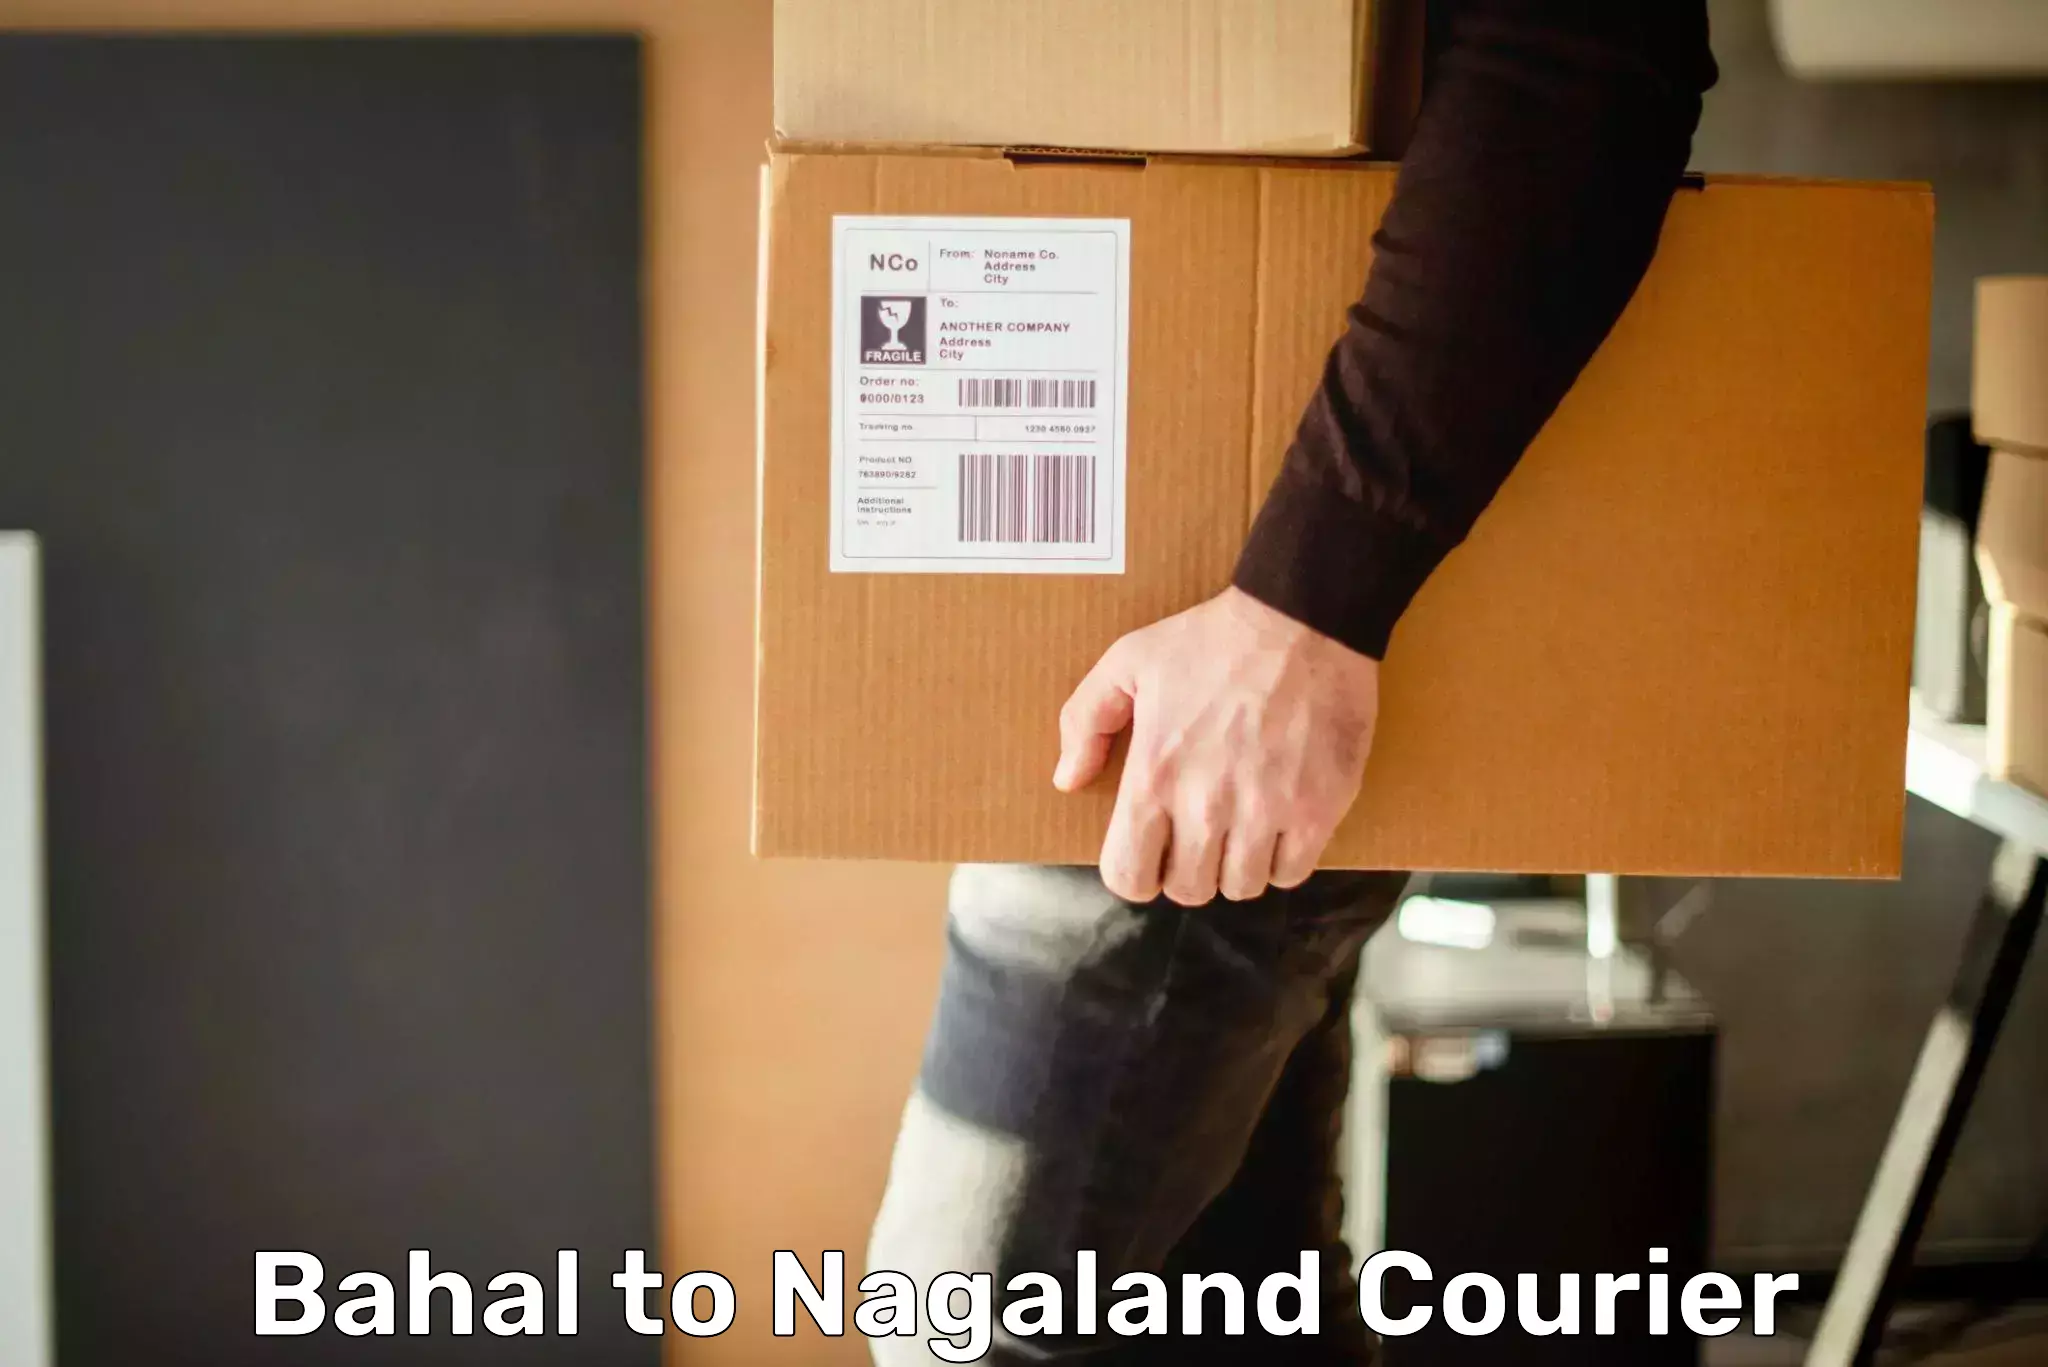 Express delivery capabilities in Bahal to Nagaland